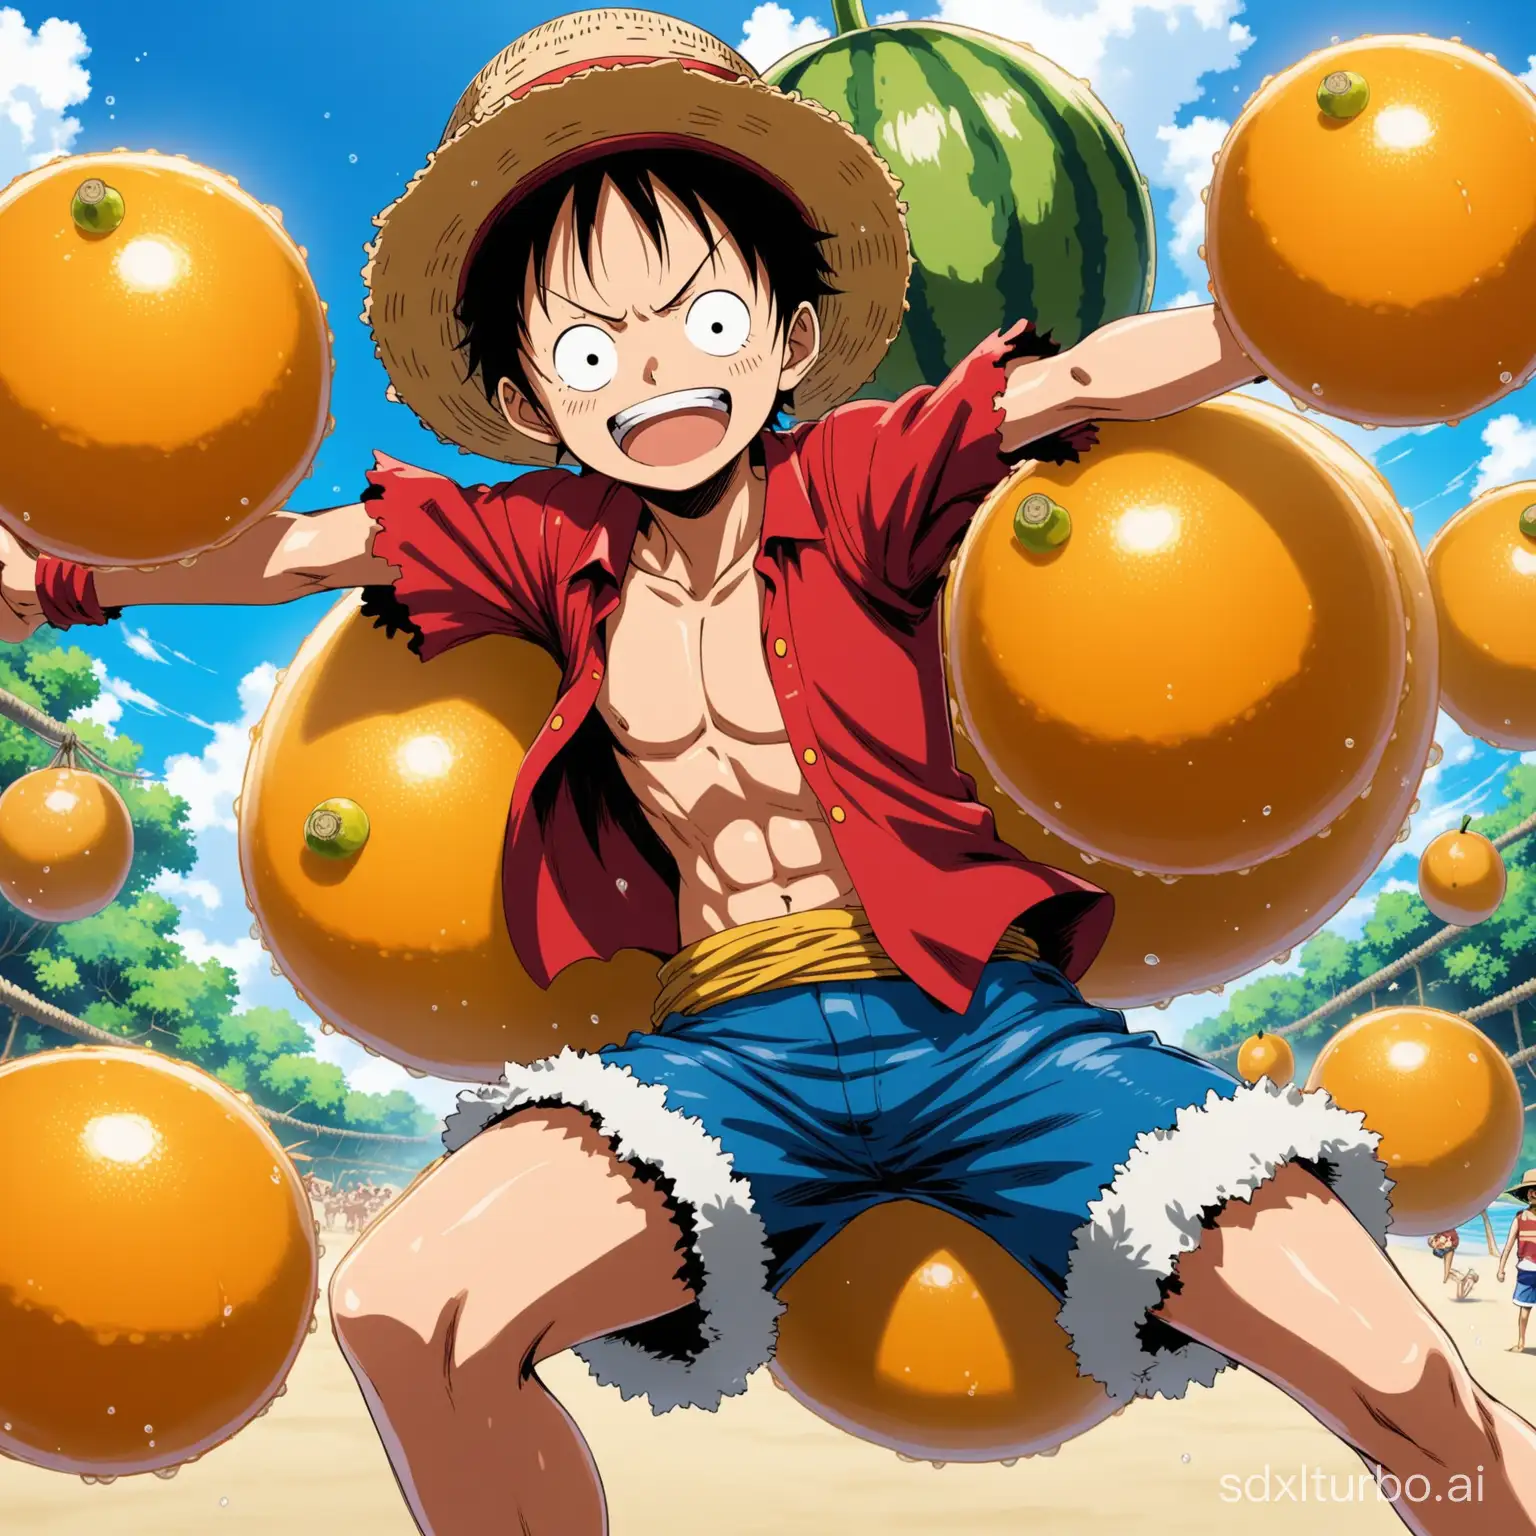 Luffy-Extends-Rubber-Arms-in-Classic-Action-Pose